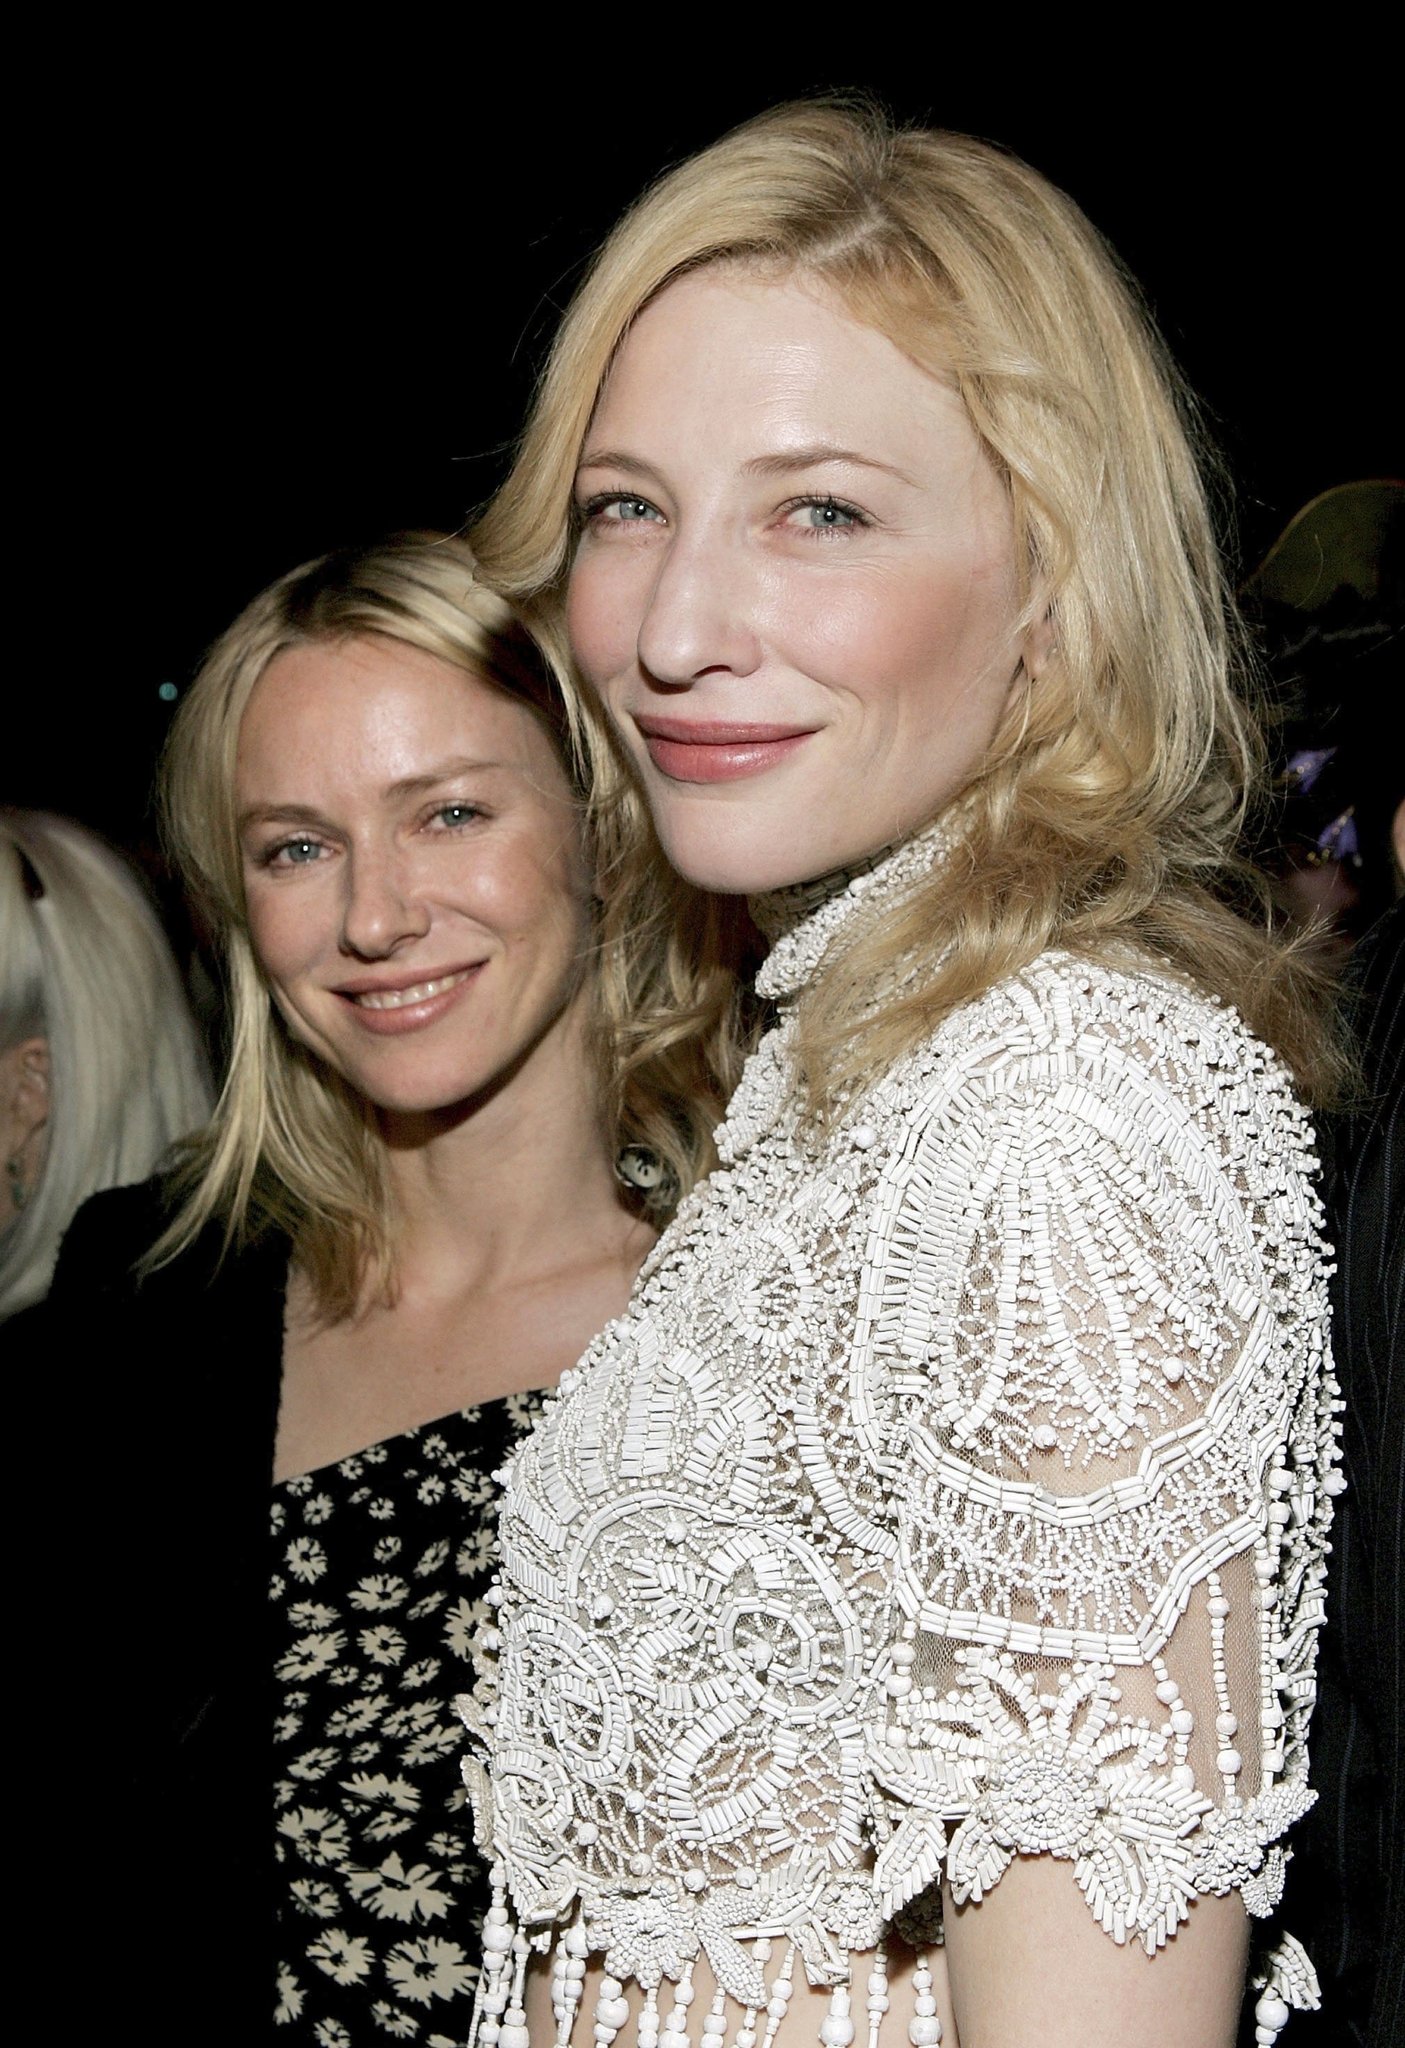 Happy Birthday, Naomi Watts!

Here are some pictures of her with Cate Blanchett in 2006.  